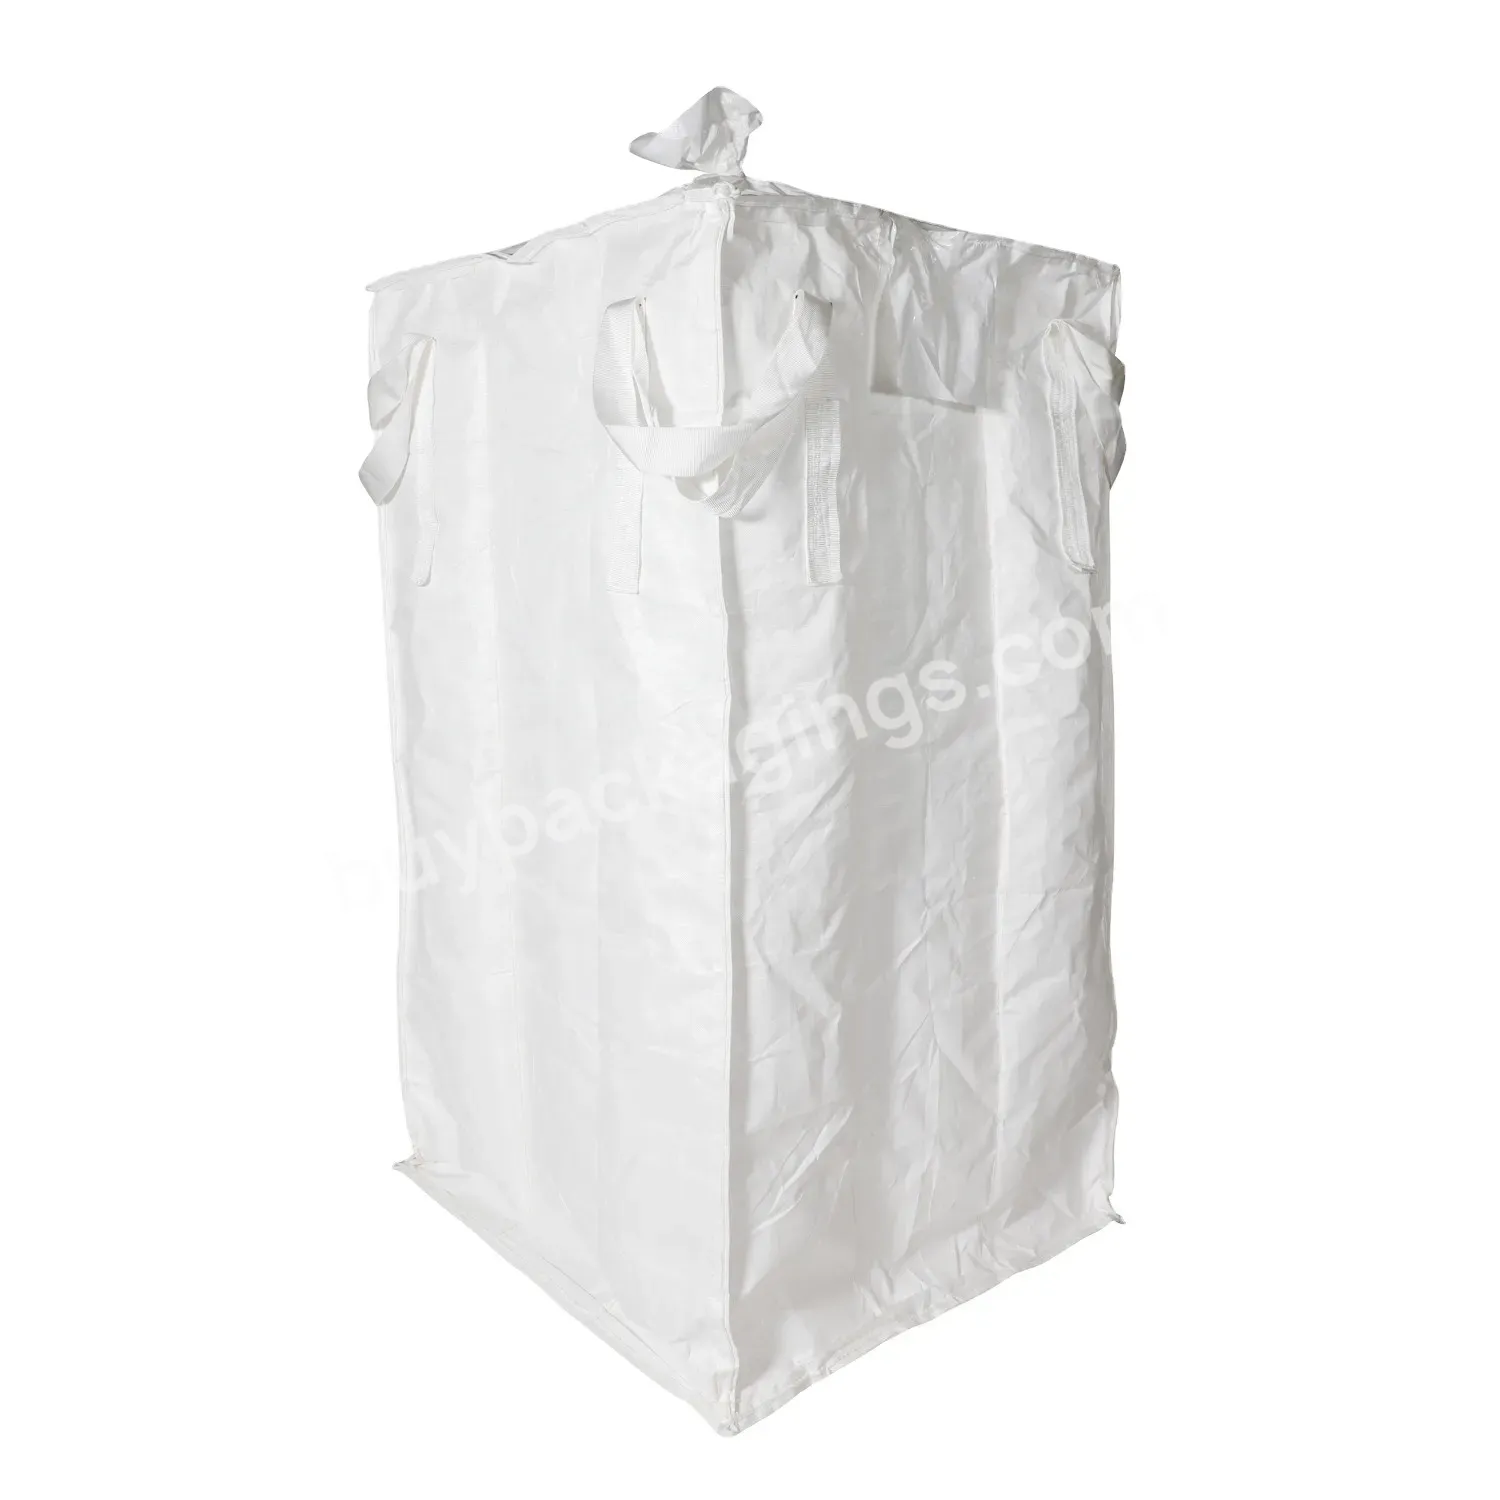 Fibc Double Layer Circular Big Bag For Building Material Chemical Fertilizer Steel Ball - Buy Fibc Double Layer Big Bag,Circular Big Bag 2000kg,100% Virginal Big Bag For Steel Ball.